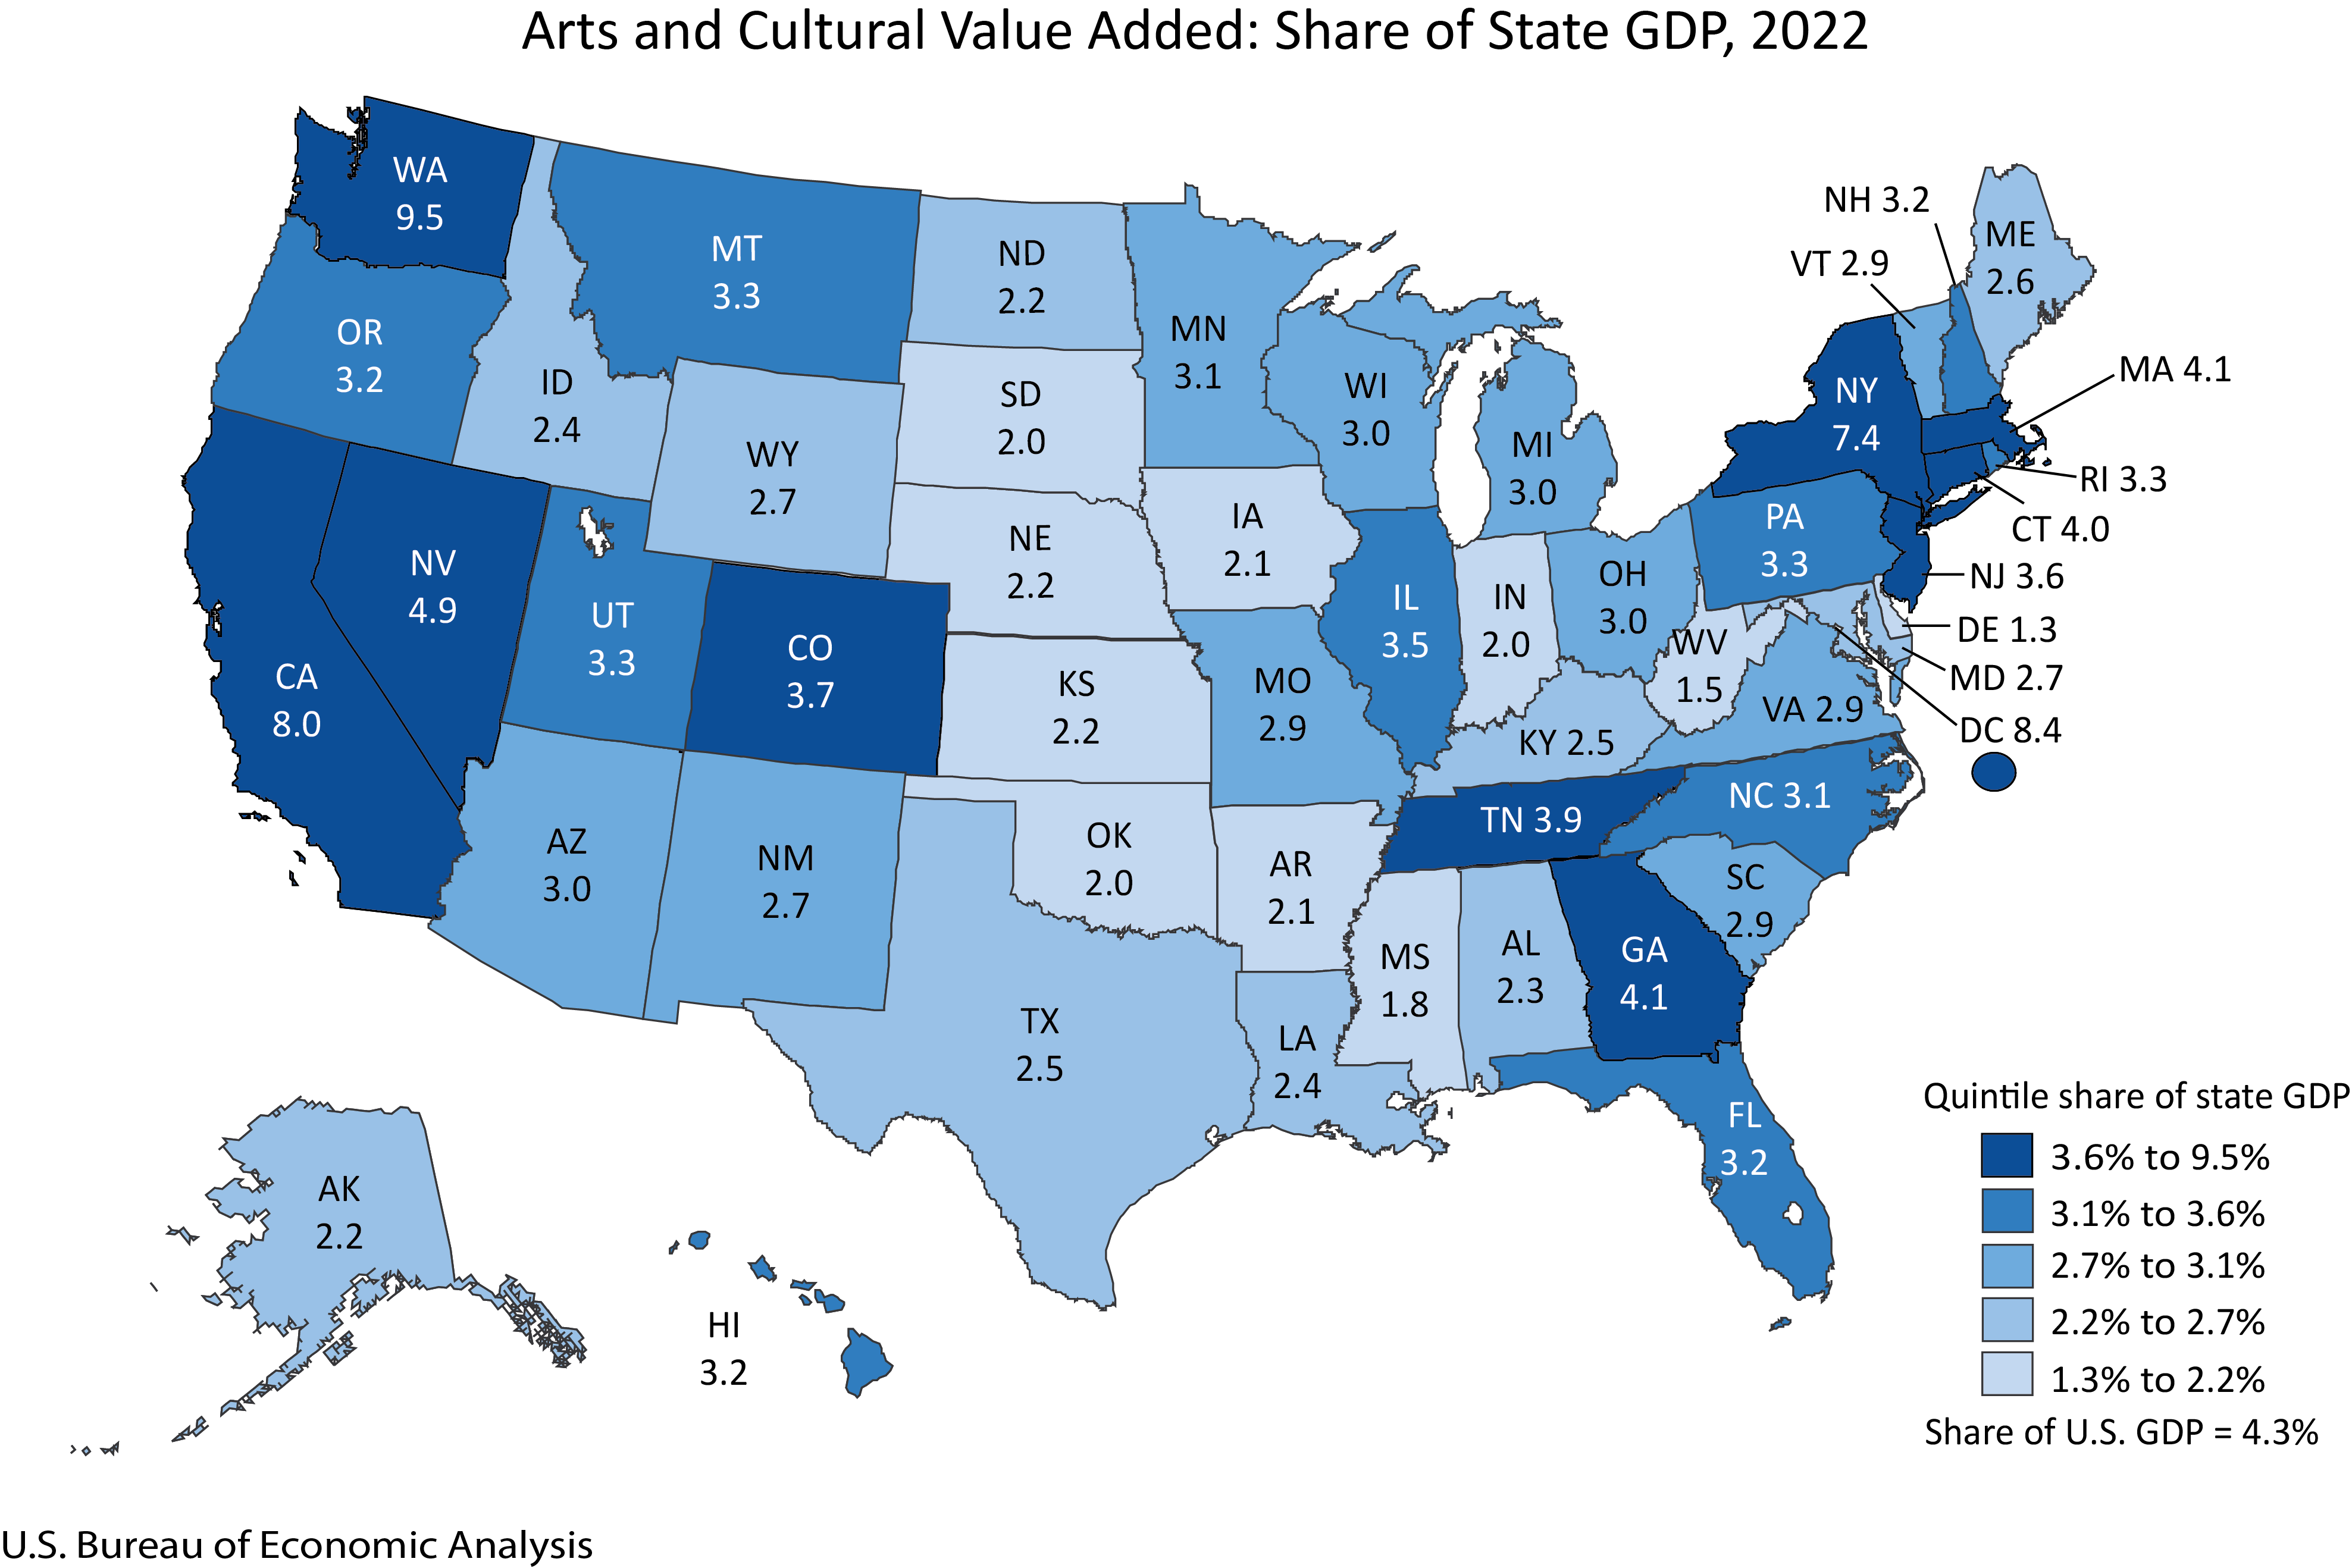 Arts and Cultural Value Added: Share of State GDP, 2022